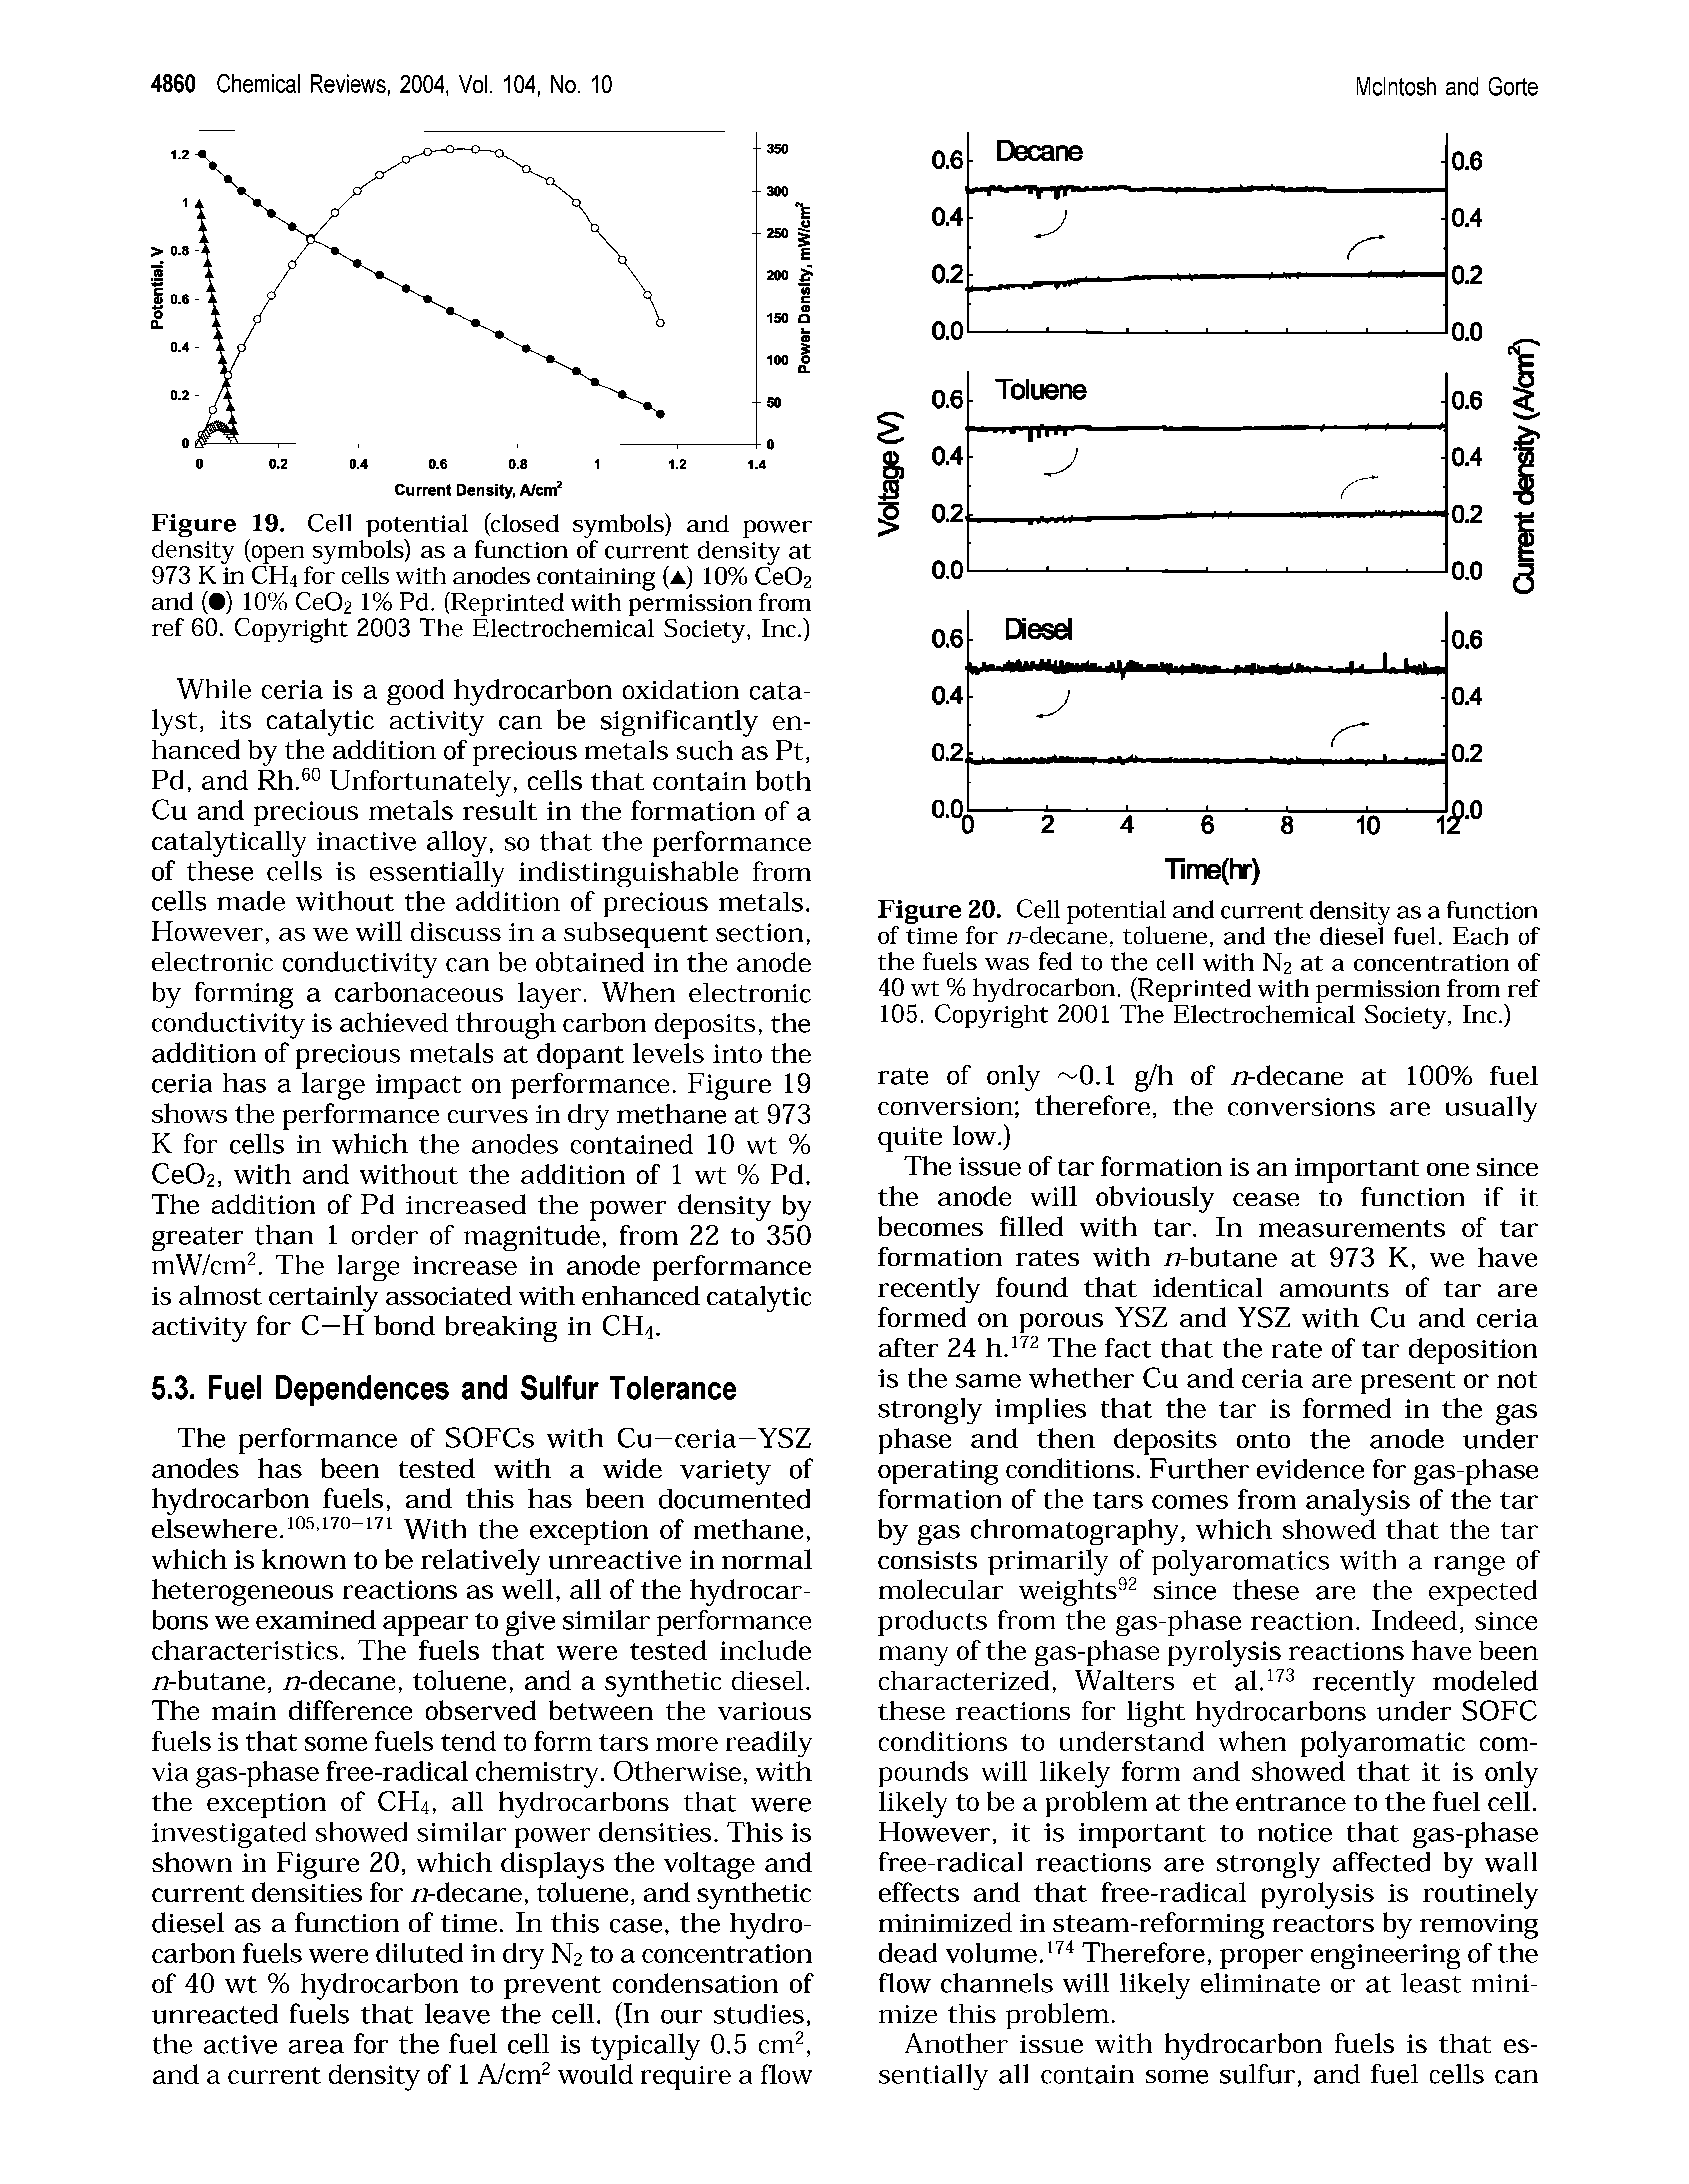 Figure 20. Cell potential and current density as a function of time for /2-decane, toluene, and the diesel fuel. Each of the fuels was fed to the cell with N2 at a concentration of 40 wt % hydrocarbon. (Reprinted with permission from ref 105. Copyright 2001 The Electrochemical Society, Inc.)...